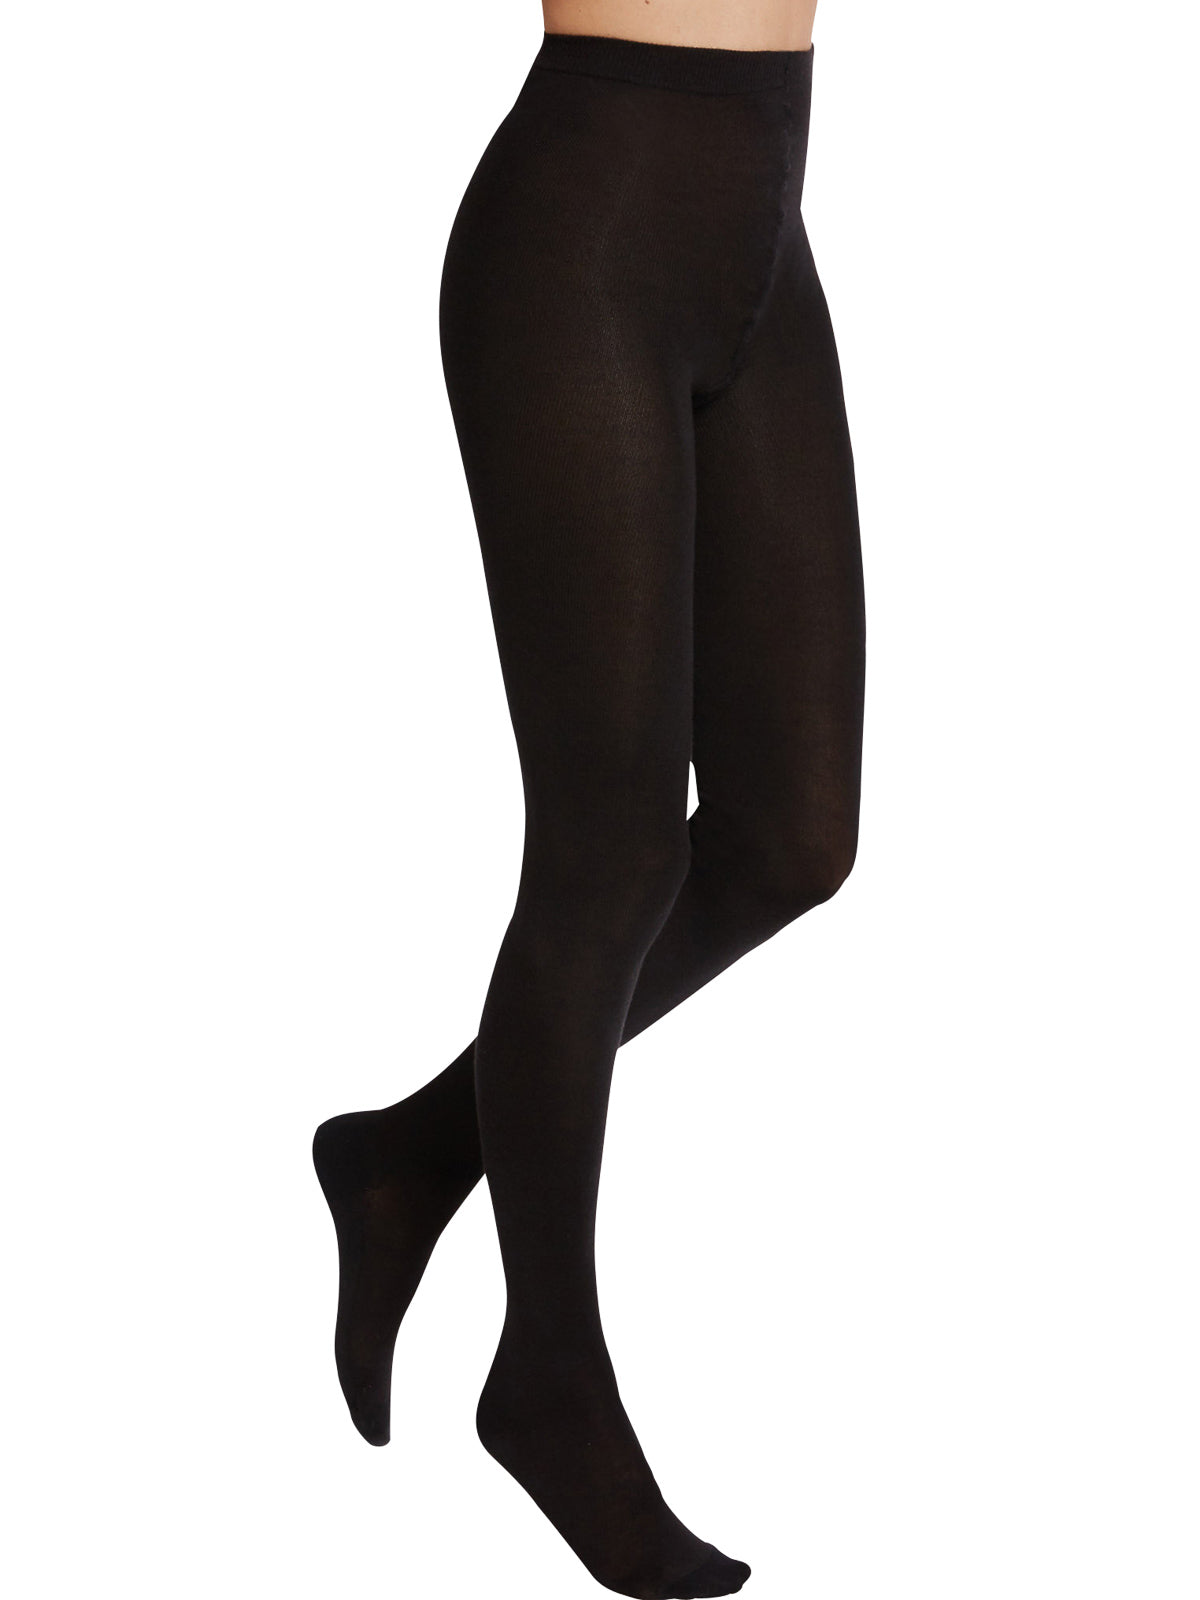 silk tights - Bal Harbour Shops